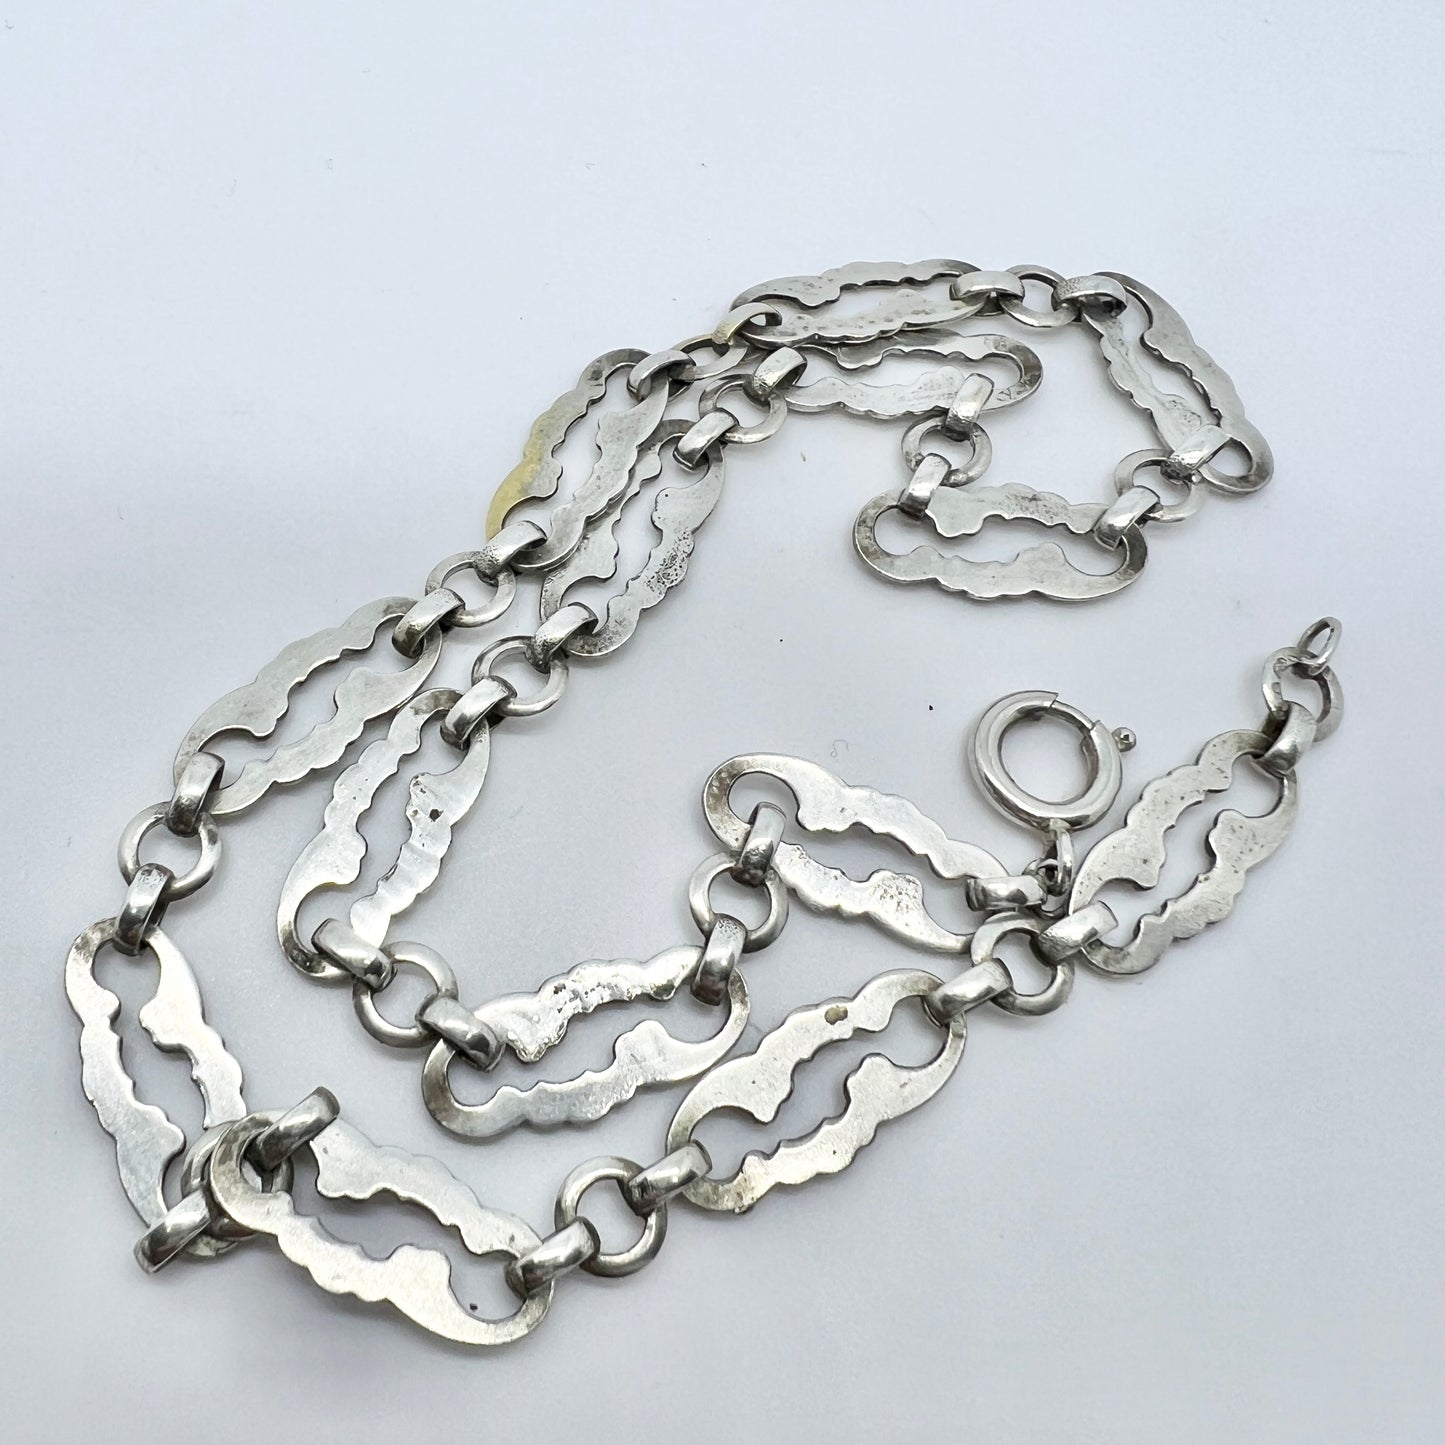 Antique Victorian Sautoir Necklace. Silver-plated. Probably France.